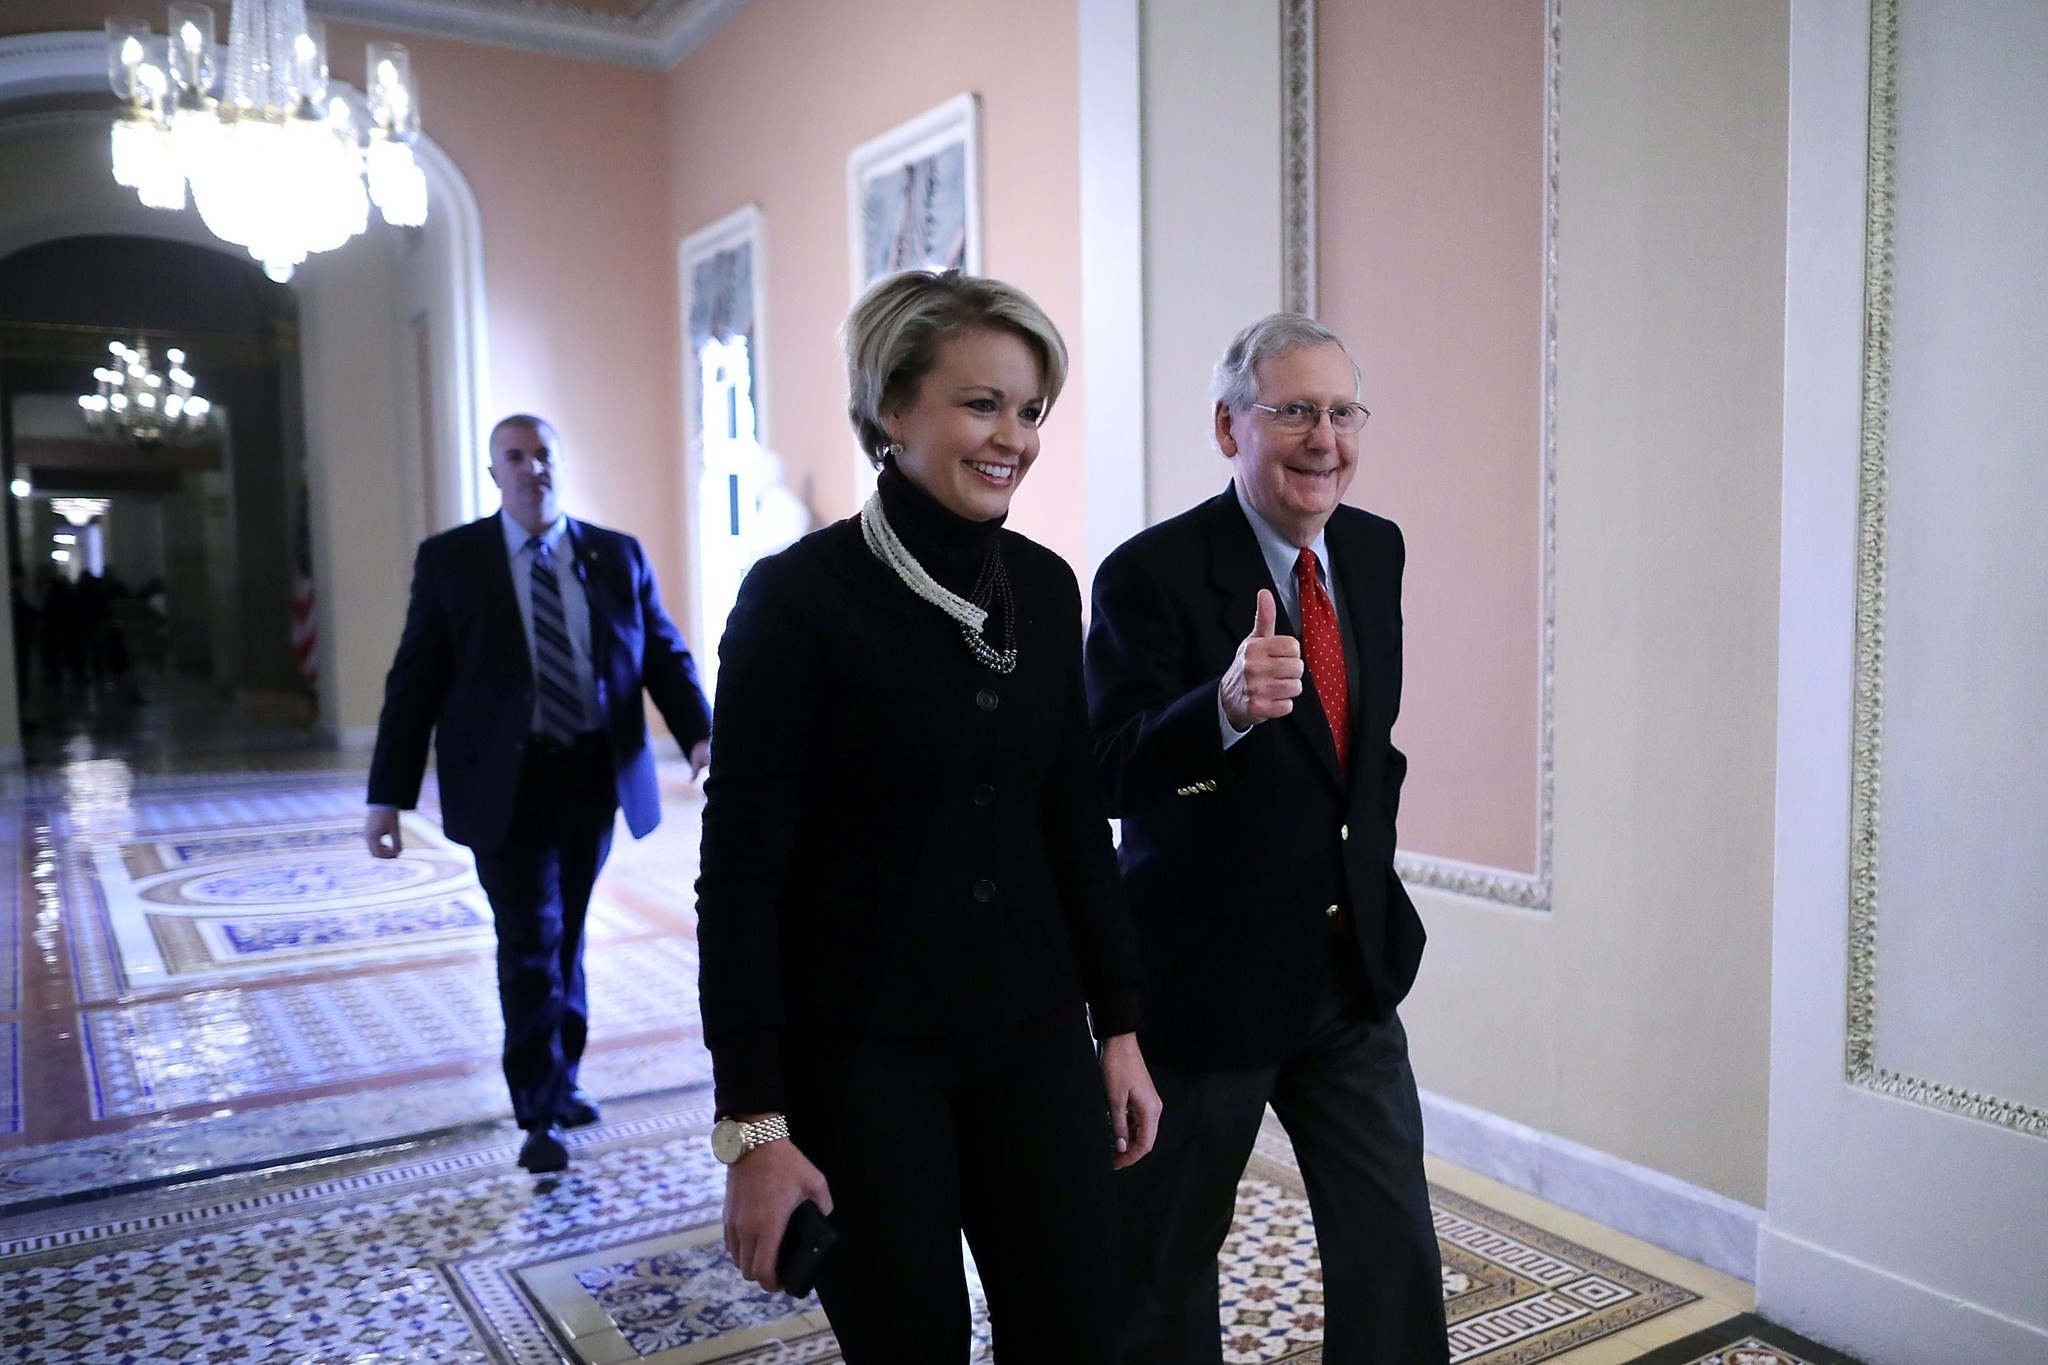 Senate Majority Leader Mitch McConnell (R-KY) gives a thumbs-up as he and his Director of Operations Stephanie Muchow head for the Senate floor at the U.S. Capitol December 1, 2017 in Washington, DC. (AFP Photo)